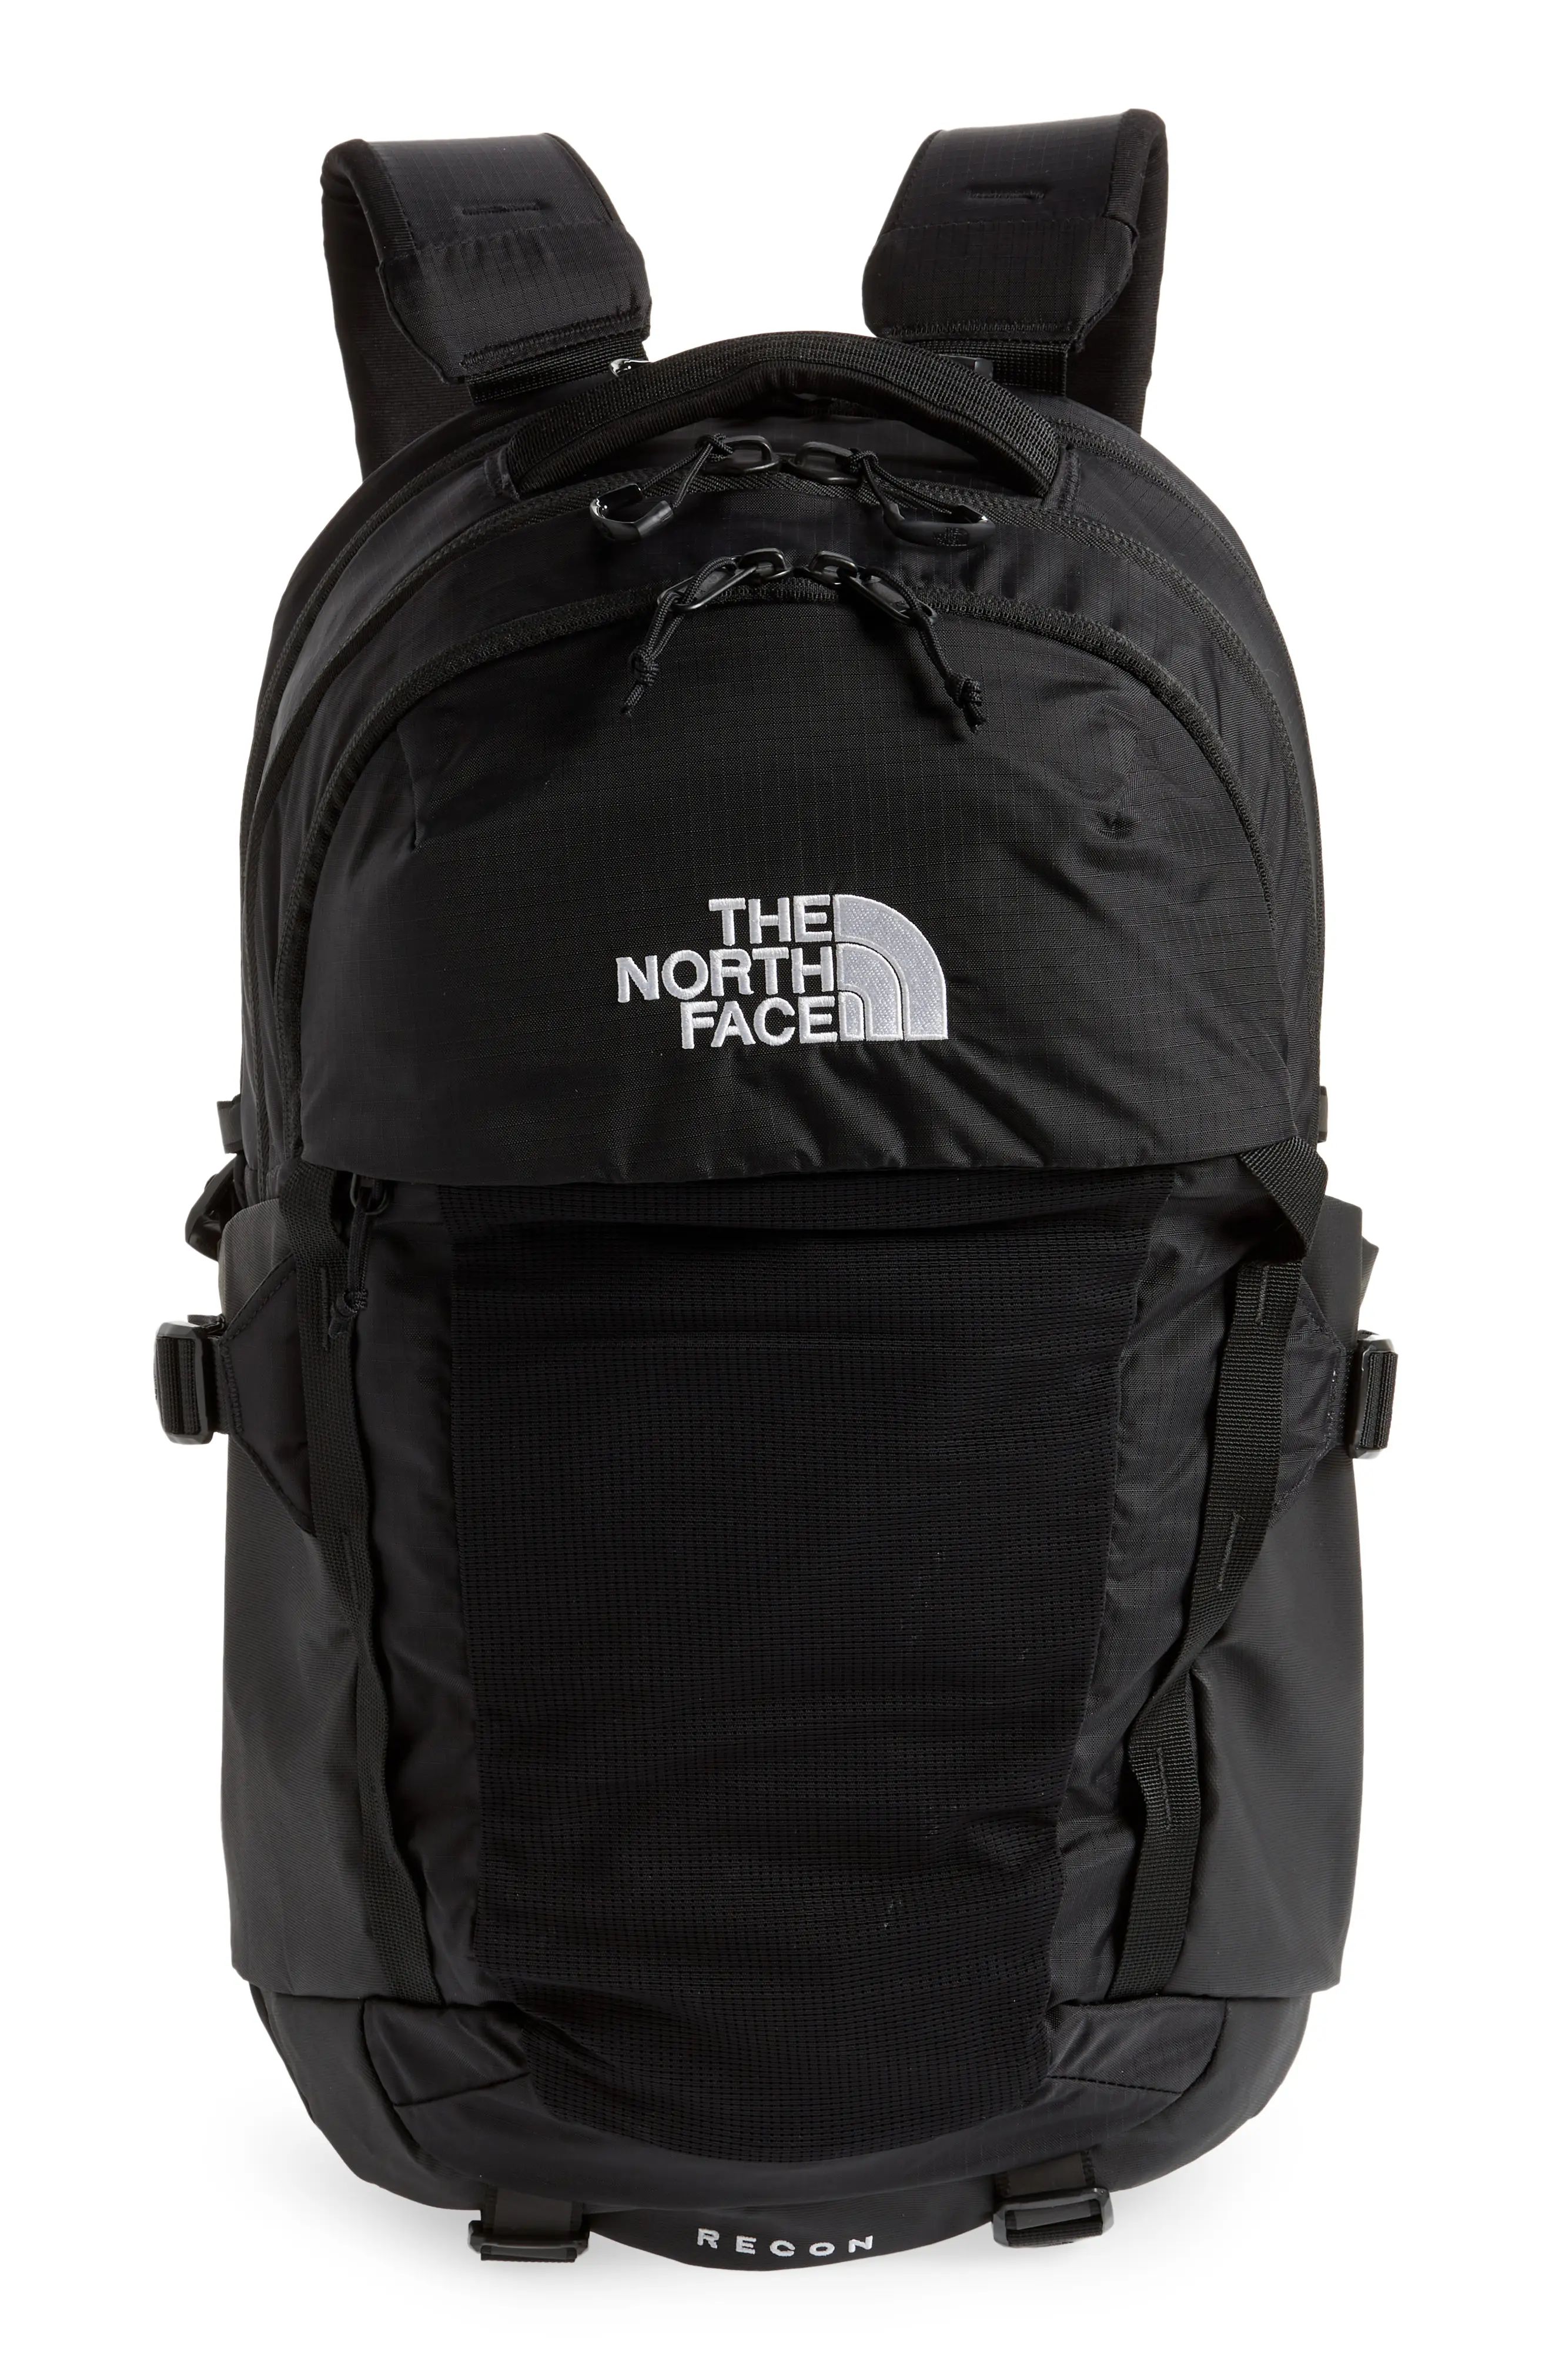 The North Face Recon 28L Water Repellent Backpack in Black at Nordstrom | Nordstrom